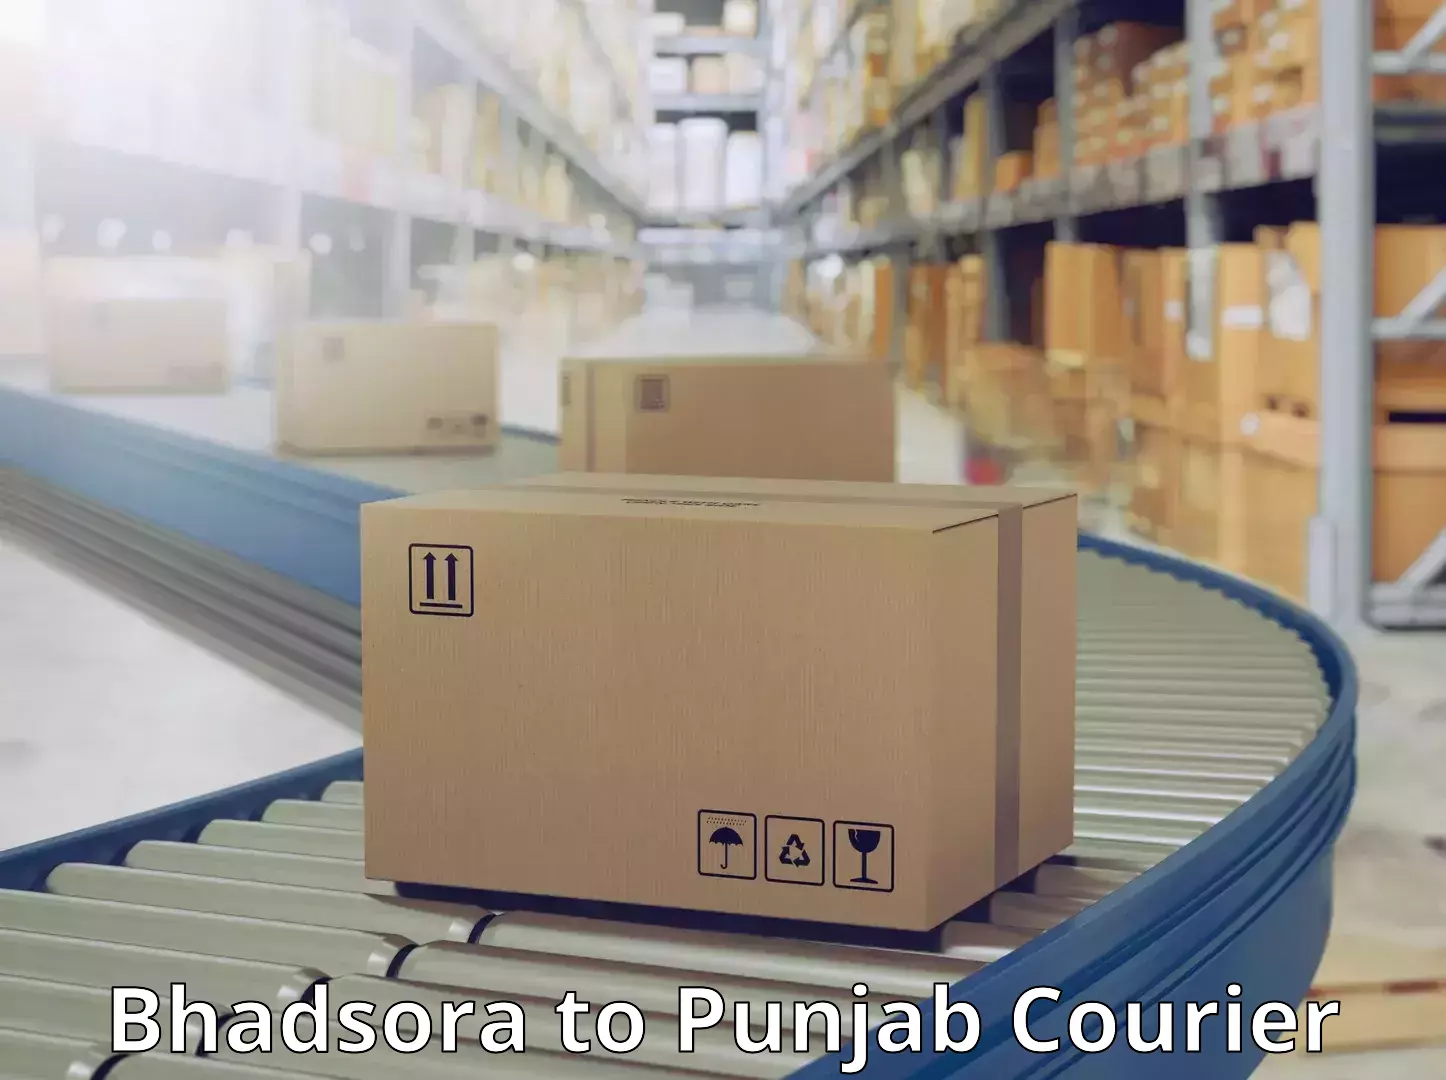 24/7 courier service Bhadsora to Punjab